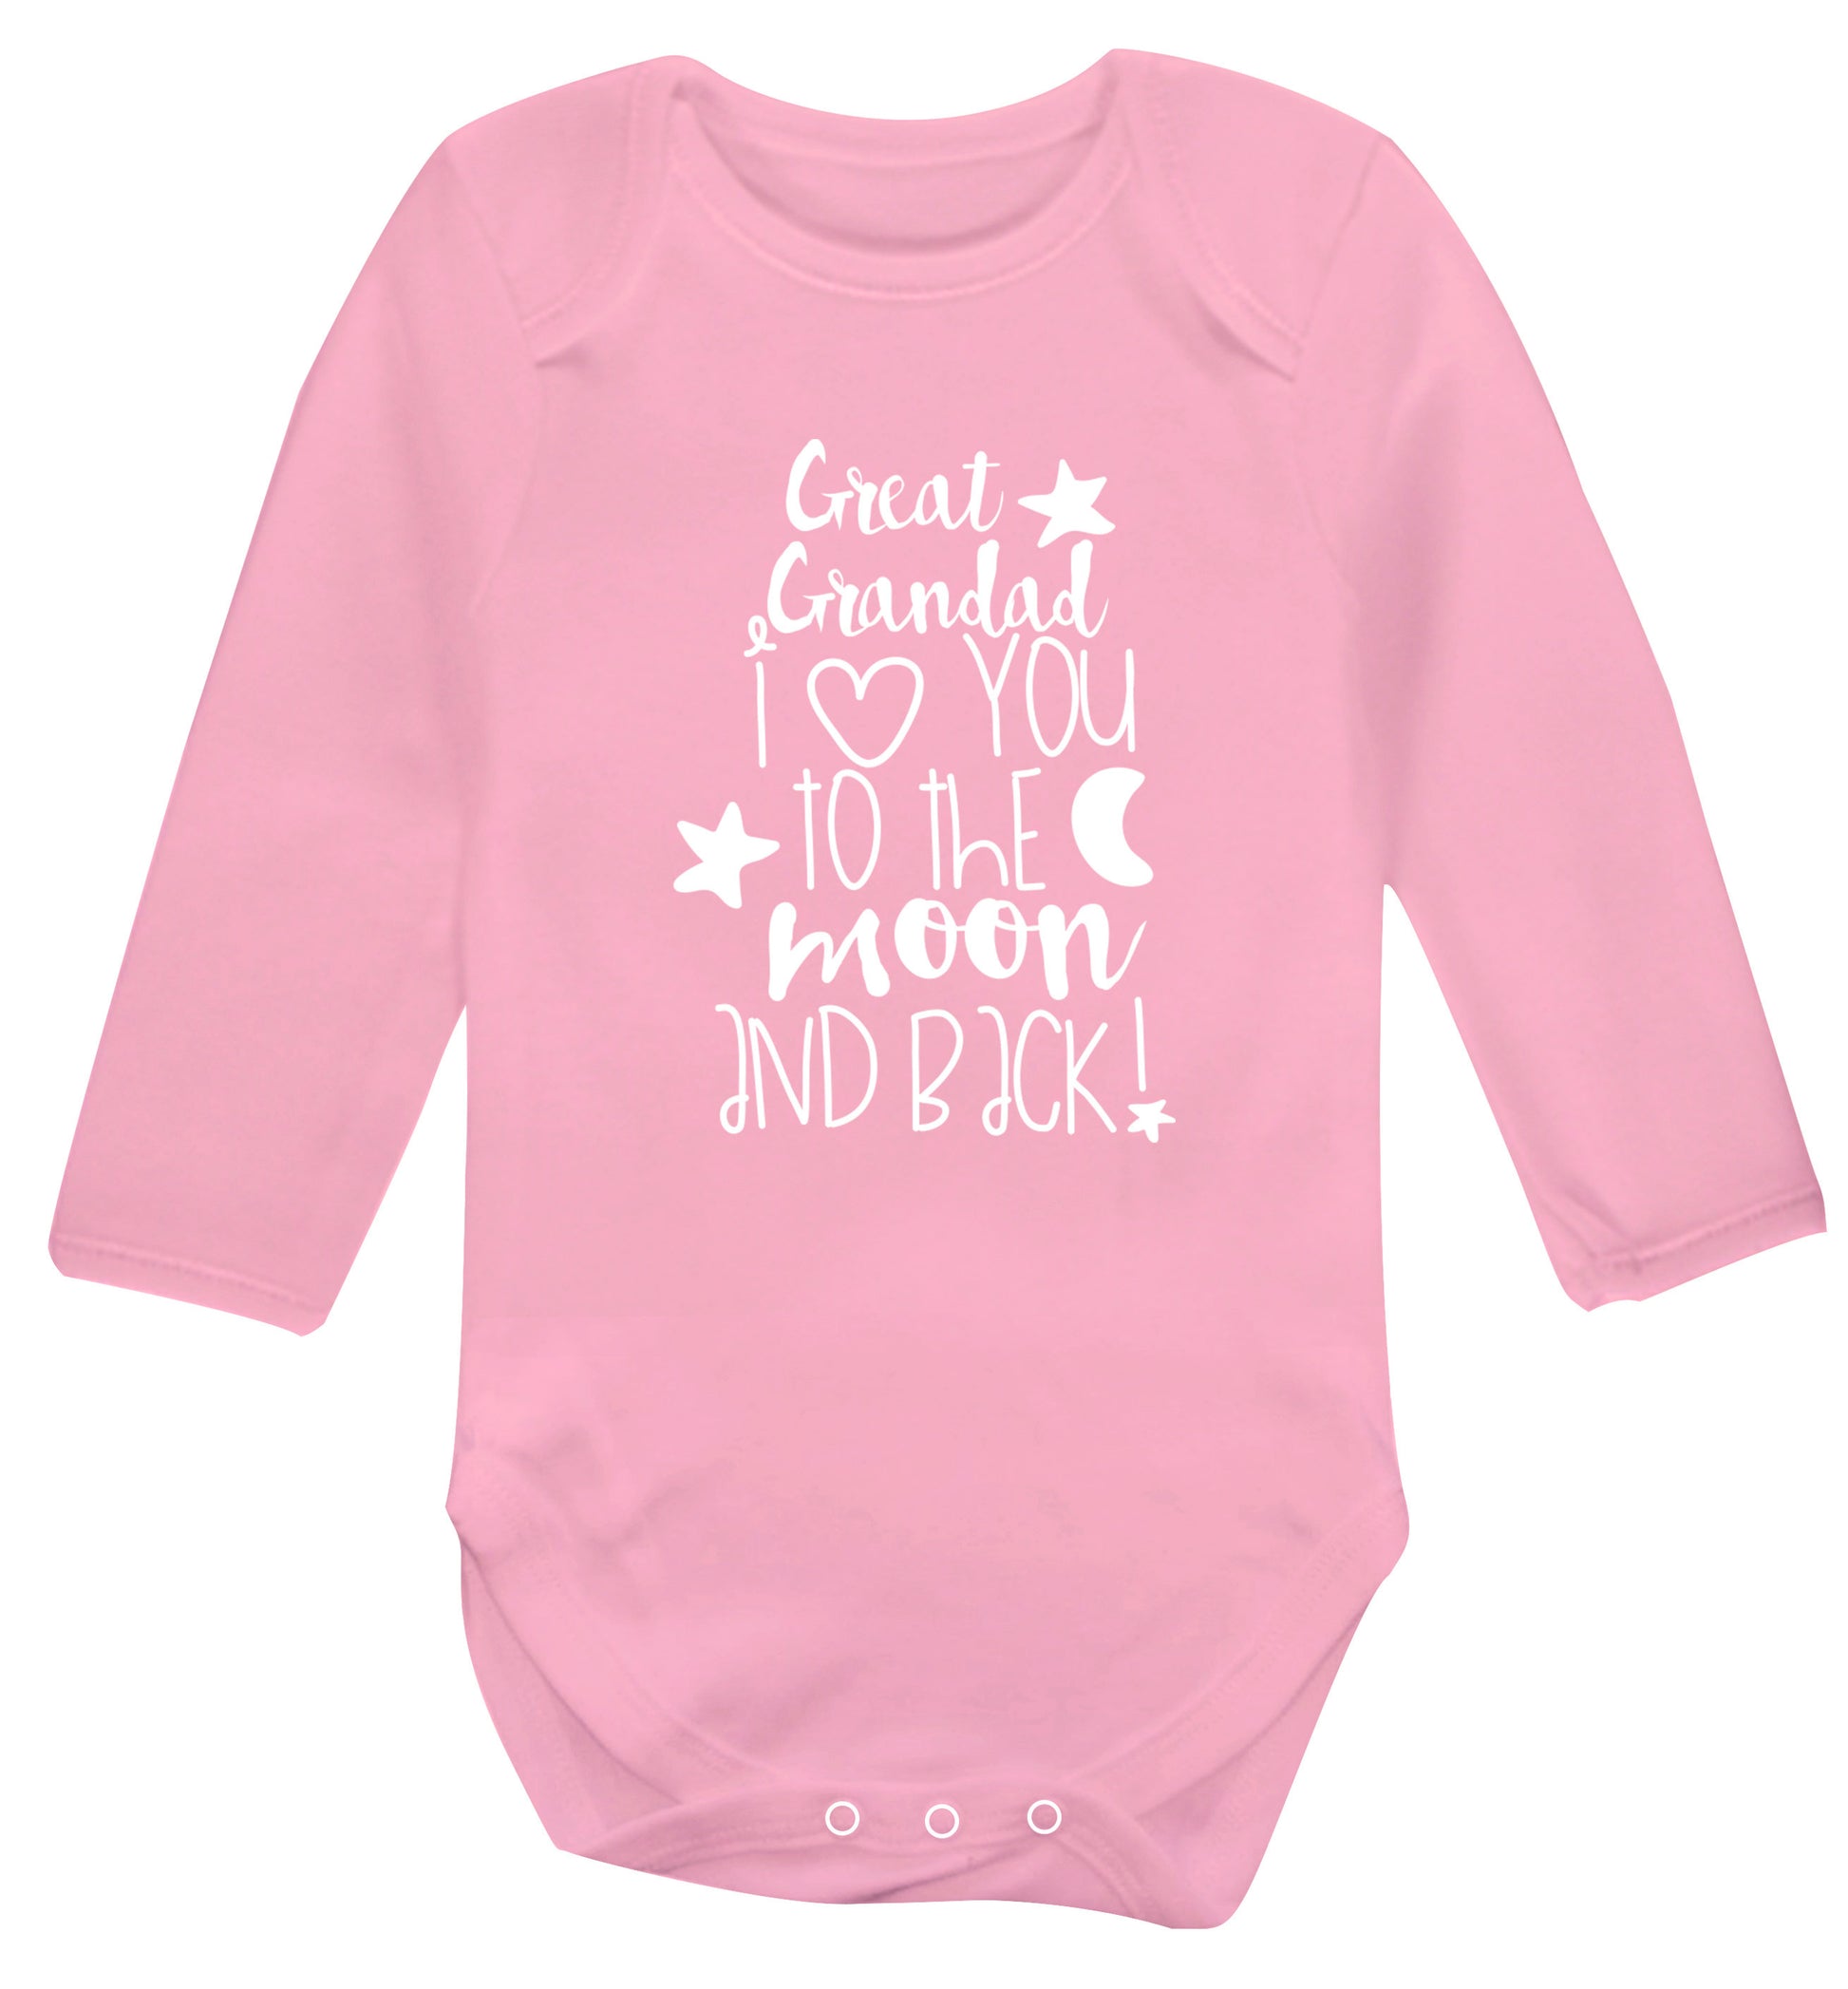 Great Grandad I love you to the moon and back Baby Vest long sleeved pale pink 6-12 months